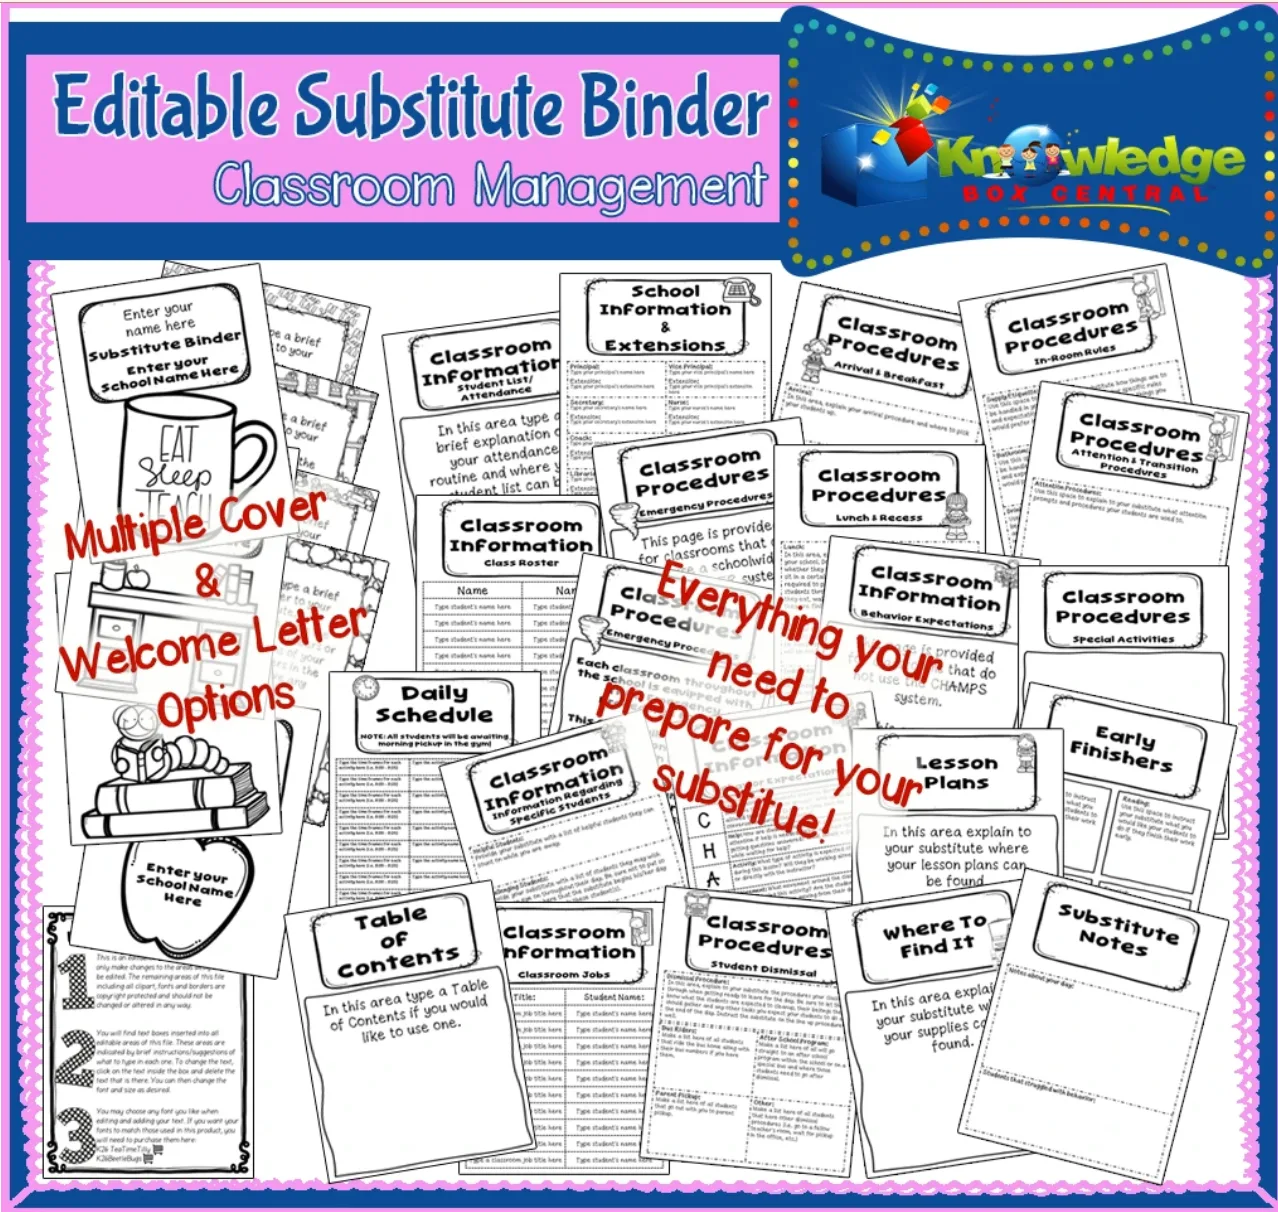 An educational teaching resource from Knowledge Box Central entitled Editable Substitute Binder - EBOOK downloadable at Teach Simple.